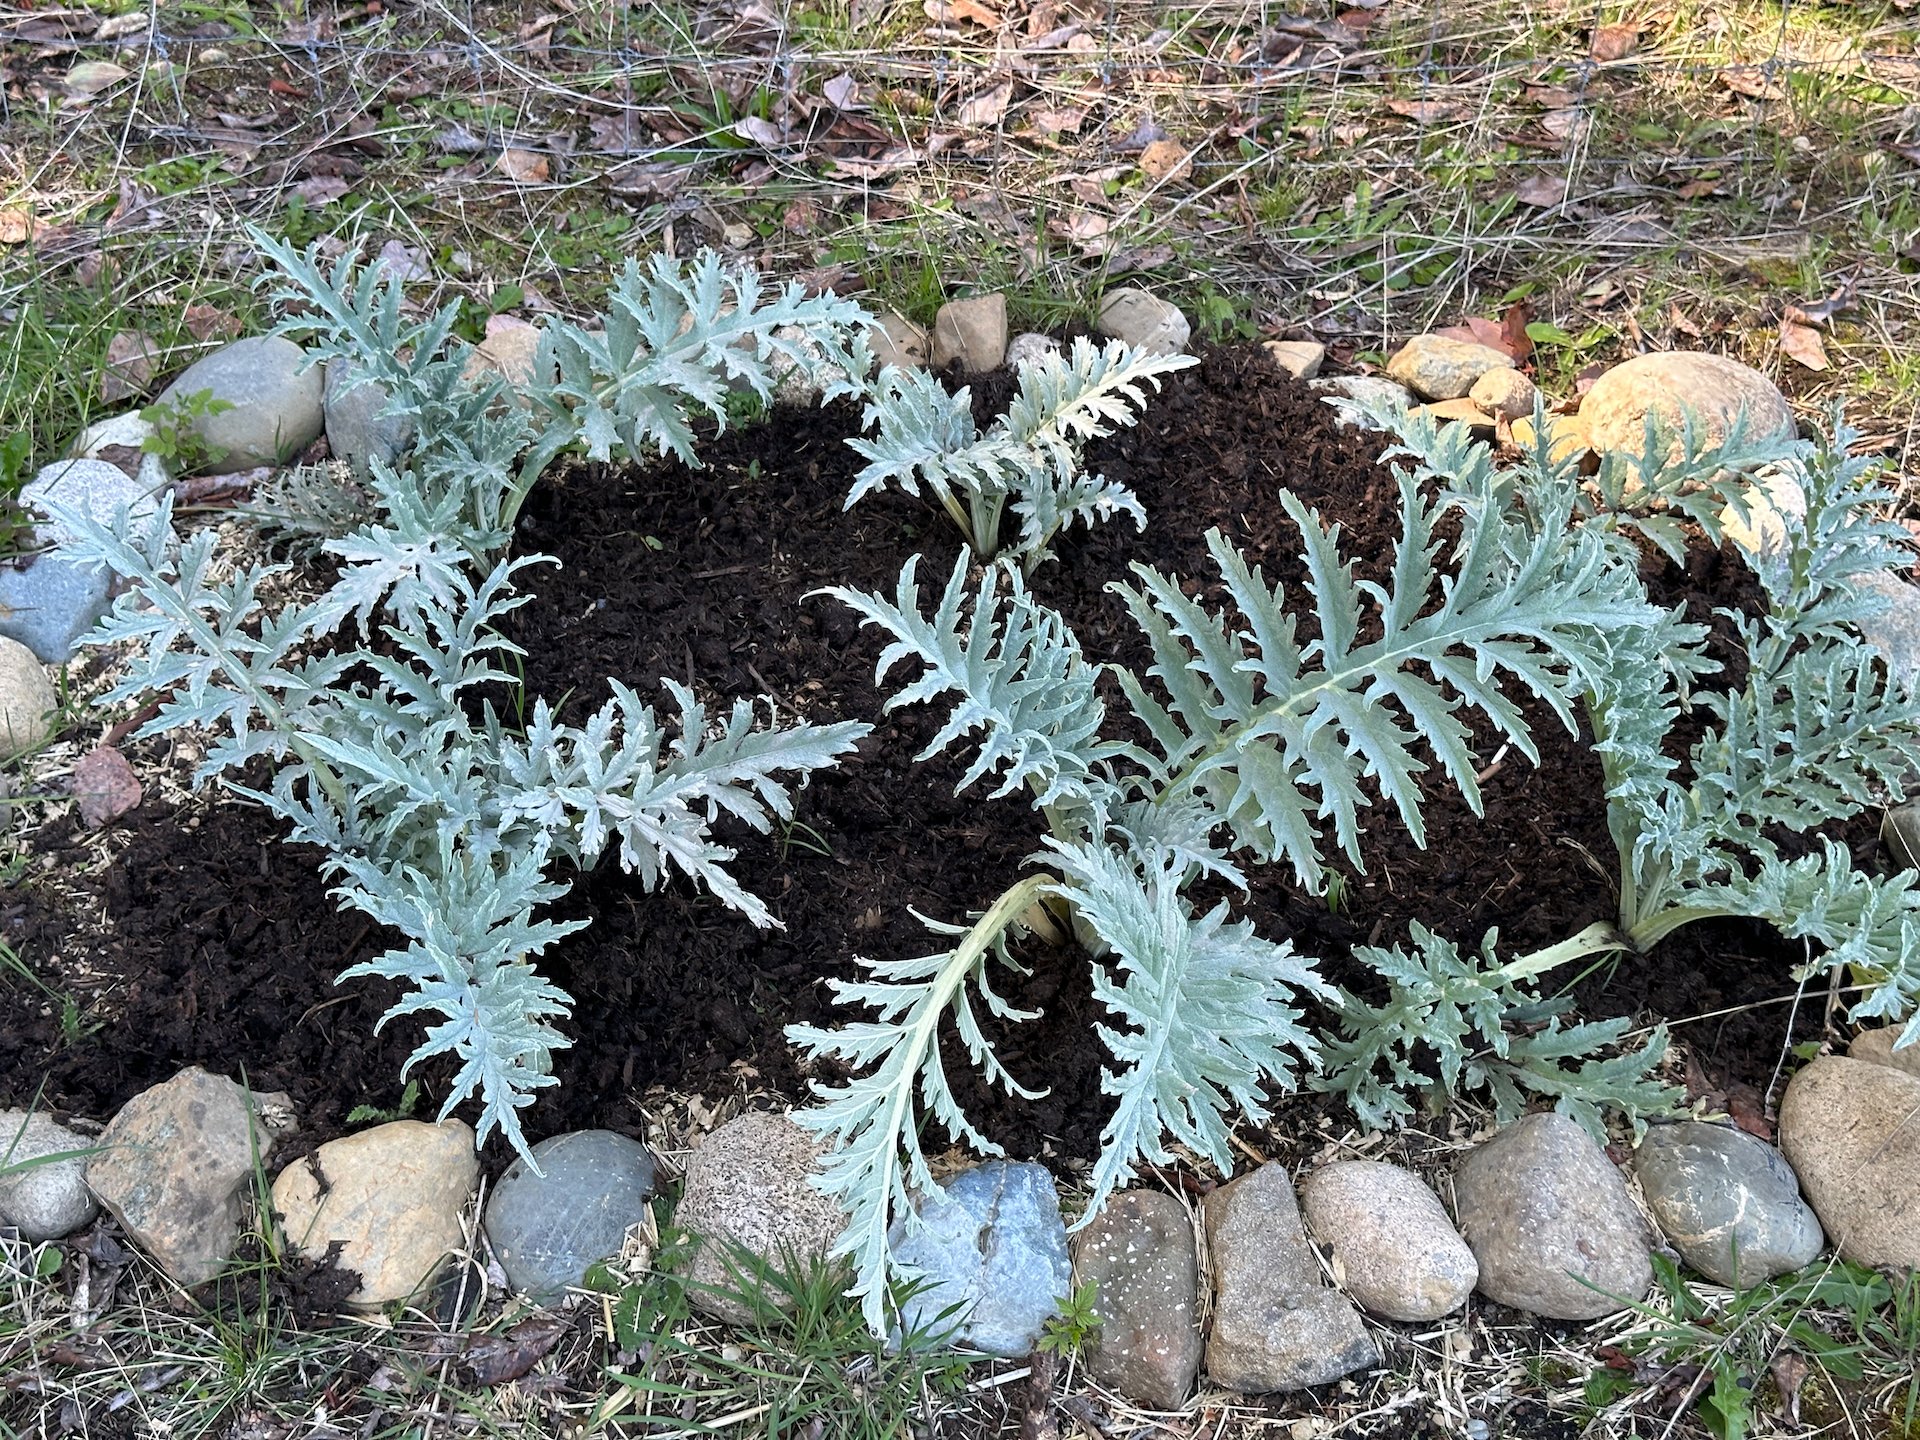  The artichokes have survived the winter,  